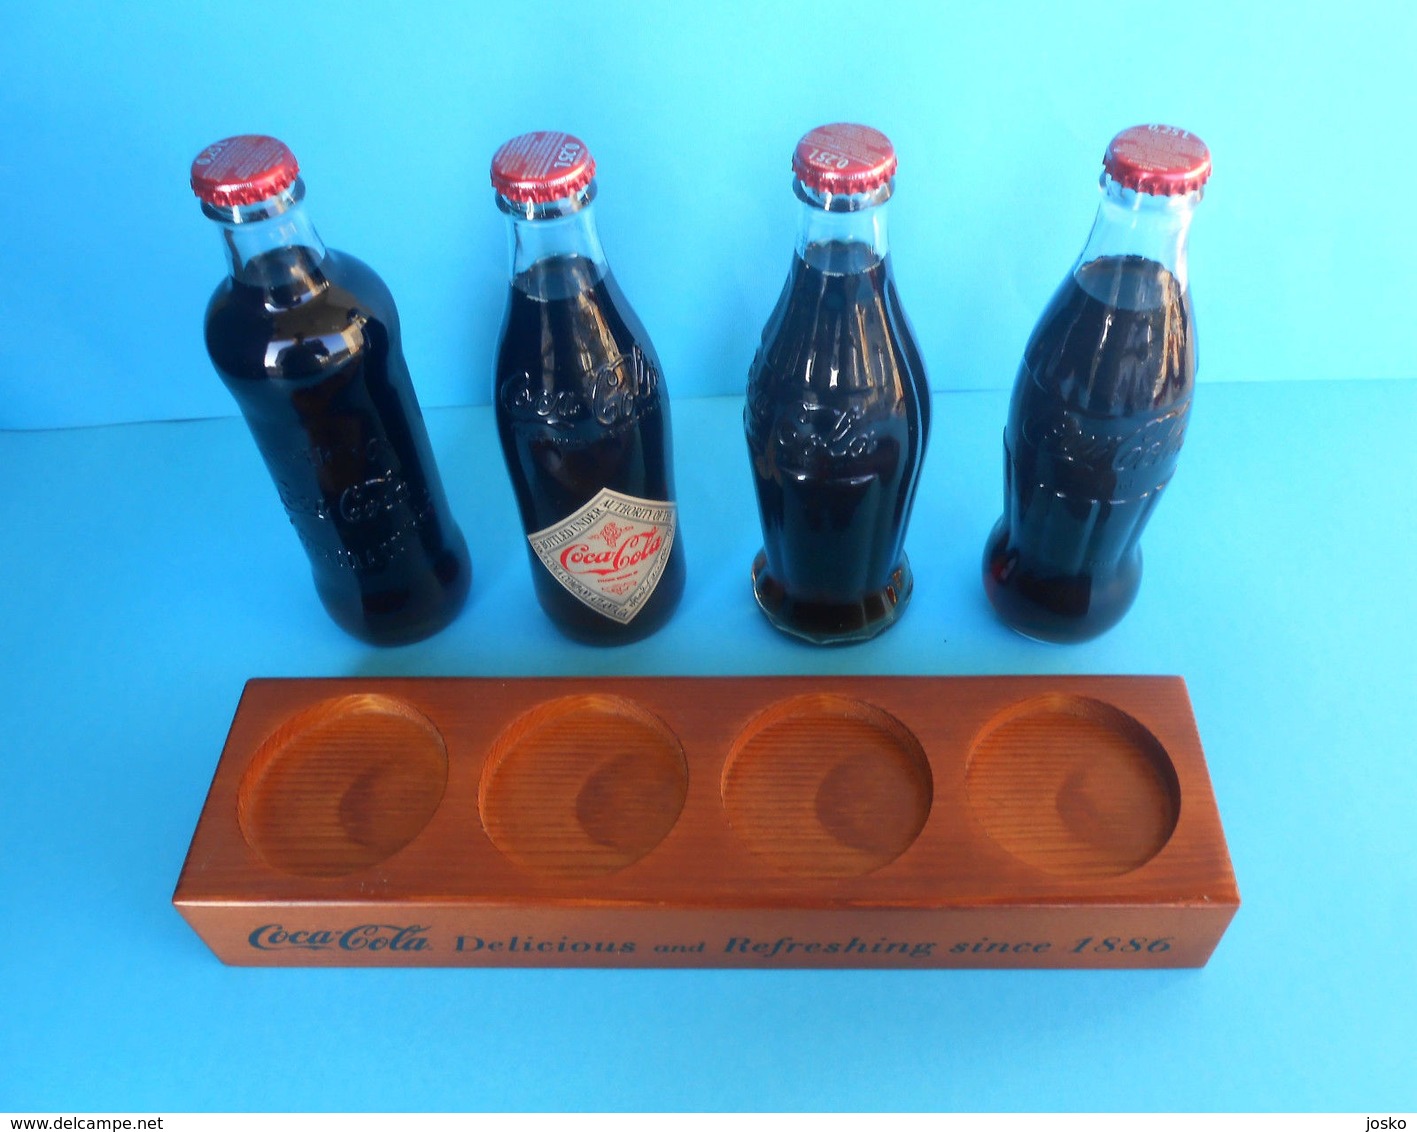 CROATIAN ISSUE ... COCA-COLA 125. YEARS - full set of 4. glass bottles * FULL UNOPENED BOTTLES ON A SPECIAL RACK